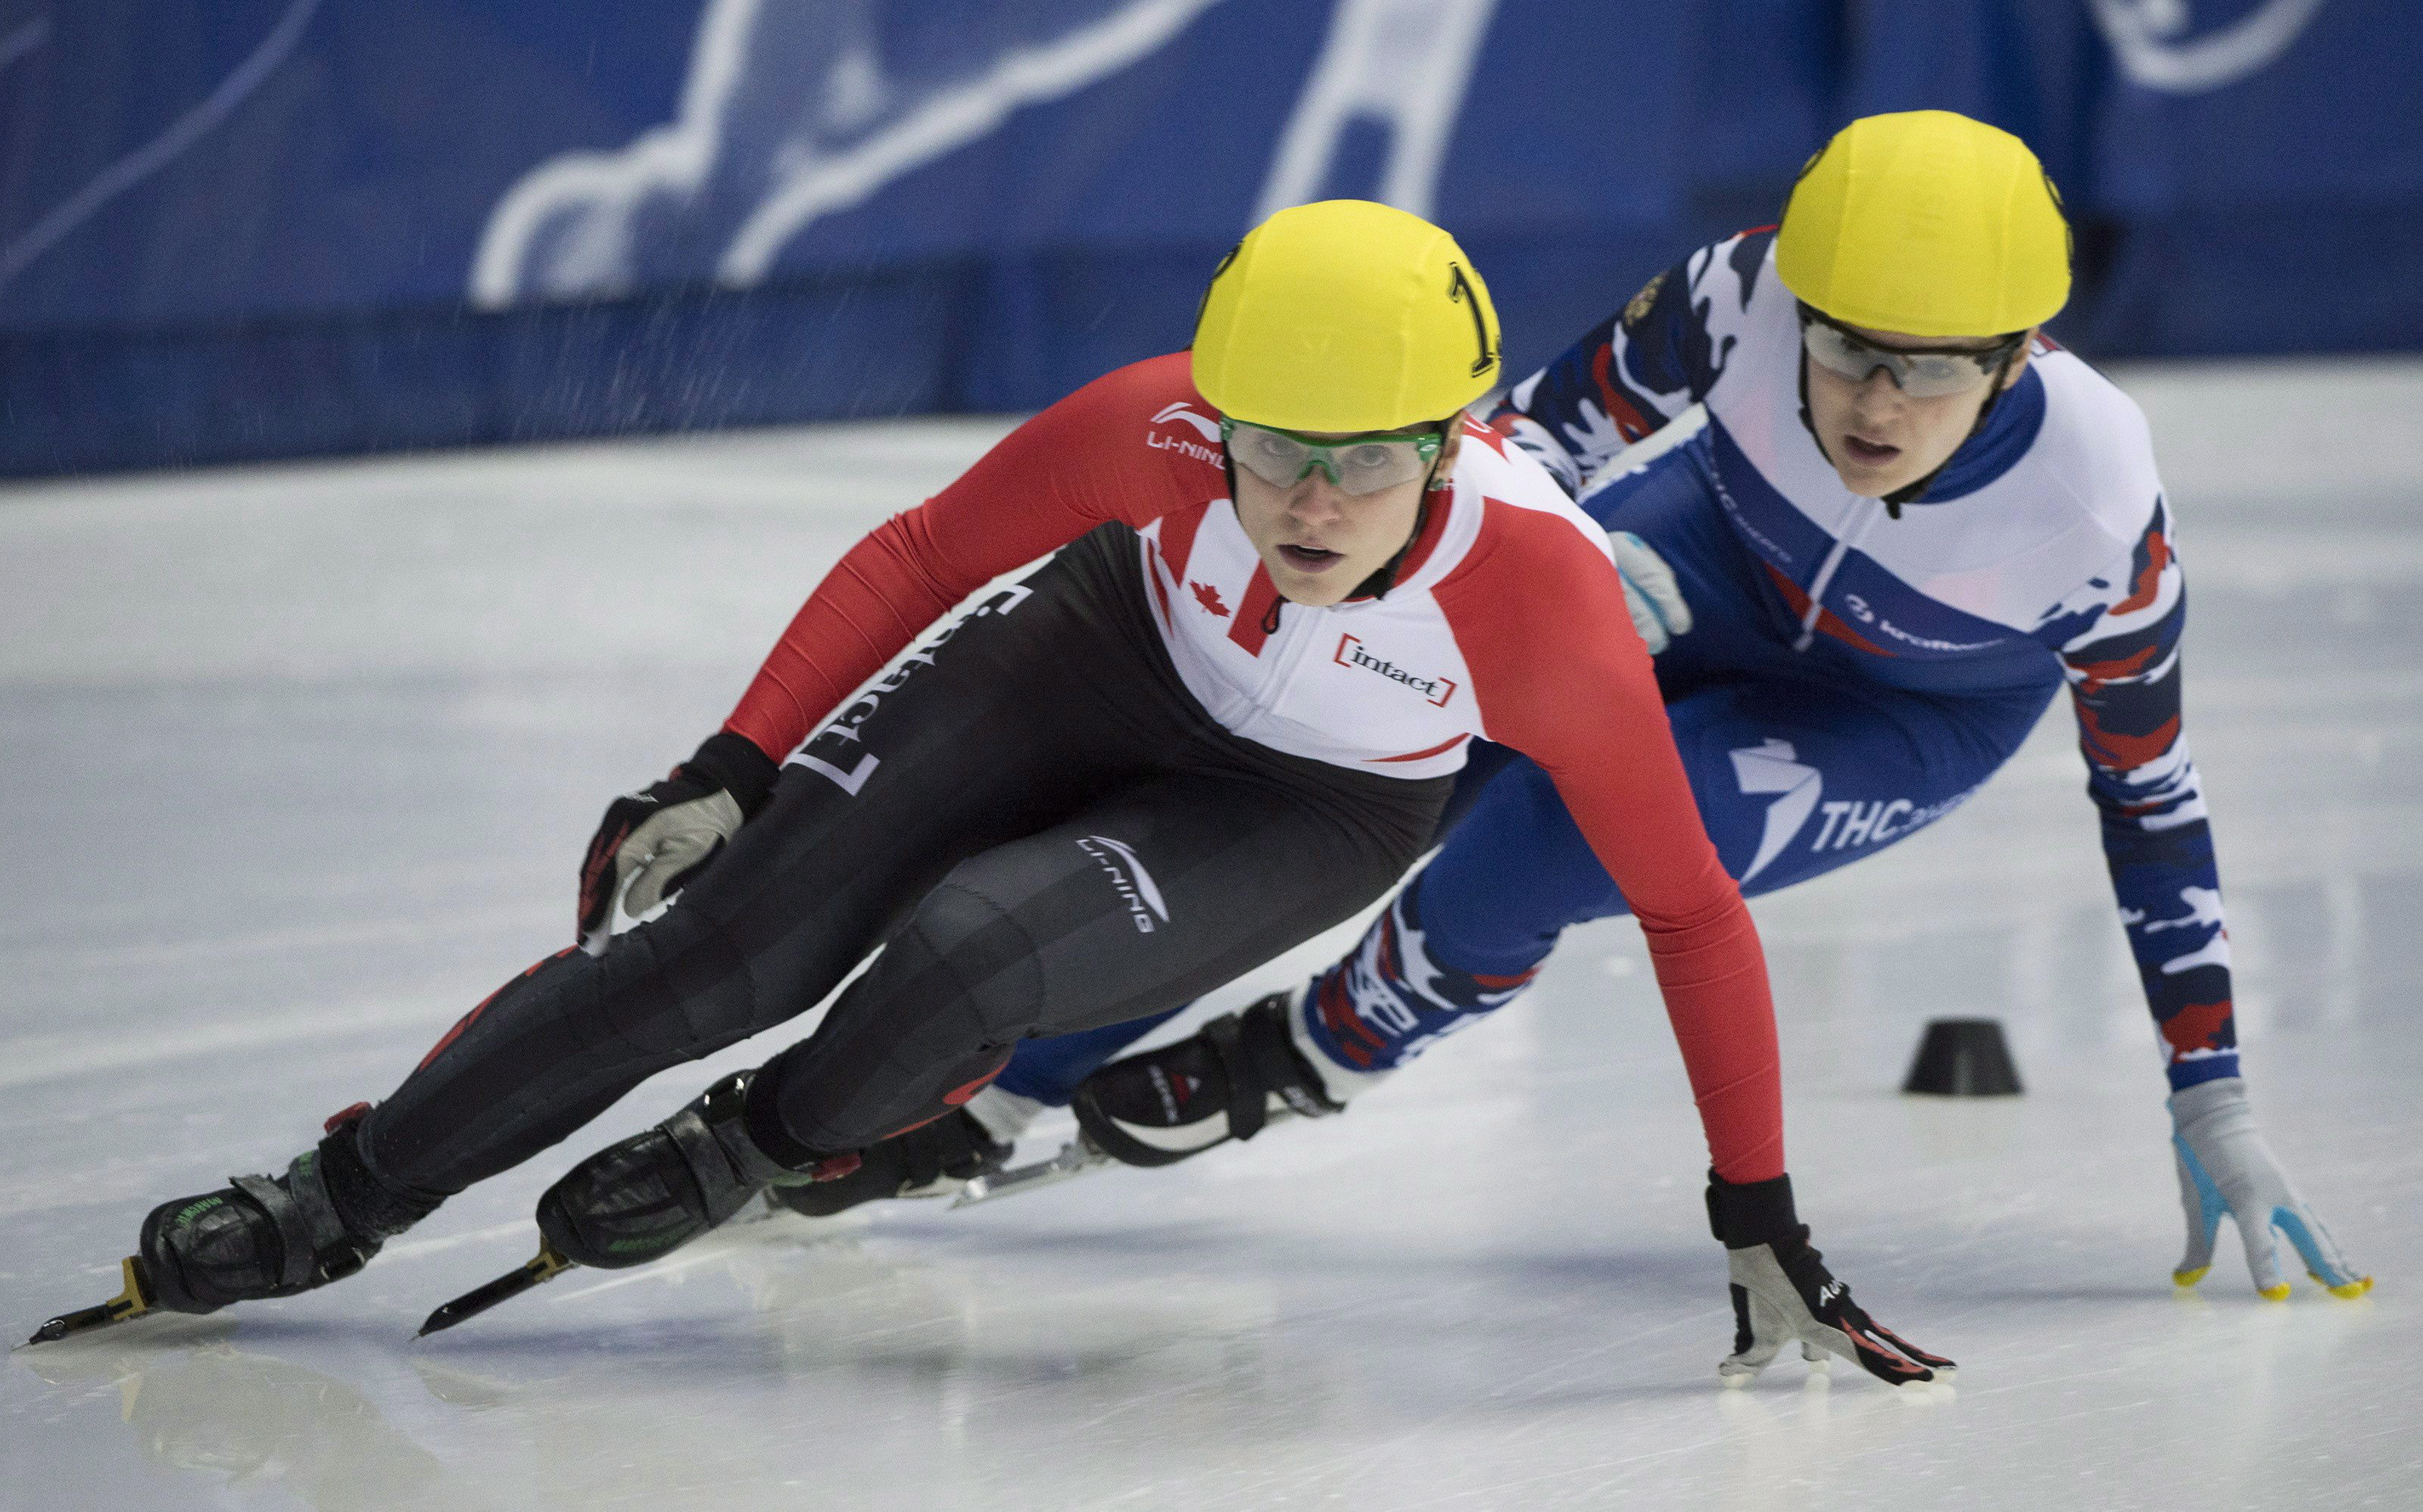 Team Canada - Kasandra Bradette takes a turn at the ISU World Cup short-track speedskating competition in Montreal